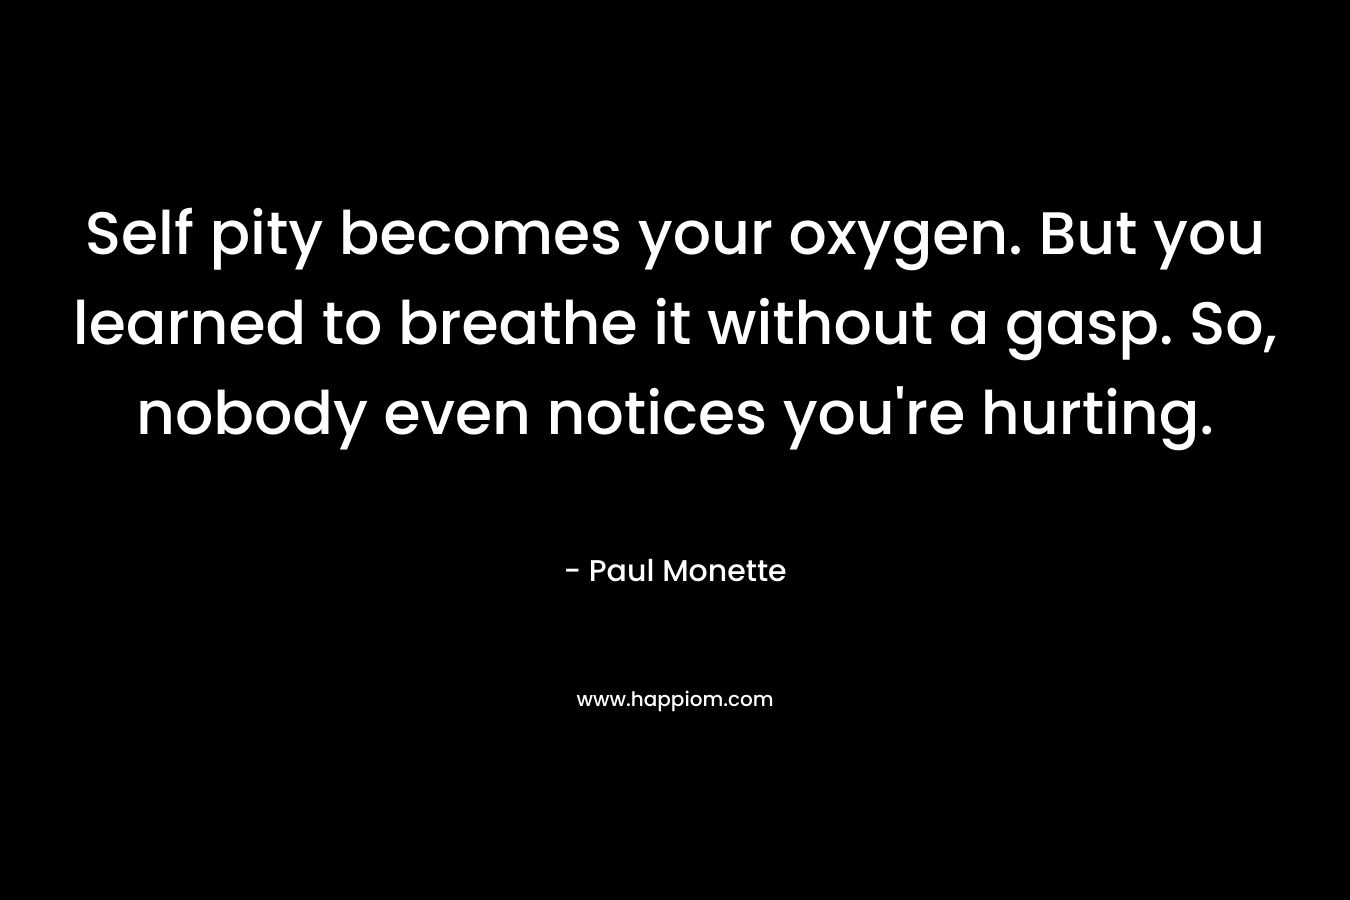 Self pity becomes your oxygen. But you learned to breathe it without a gasp. So, nobody even notices you’re hurting. – Paul Monette